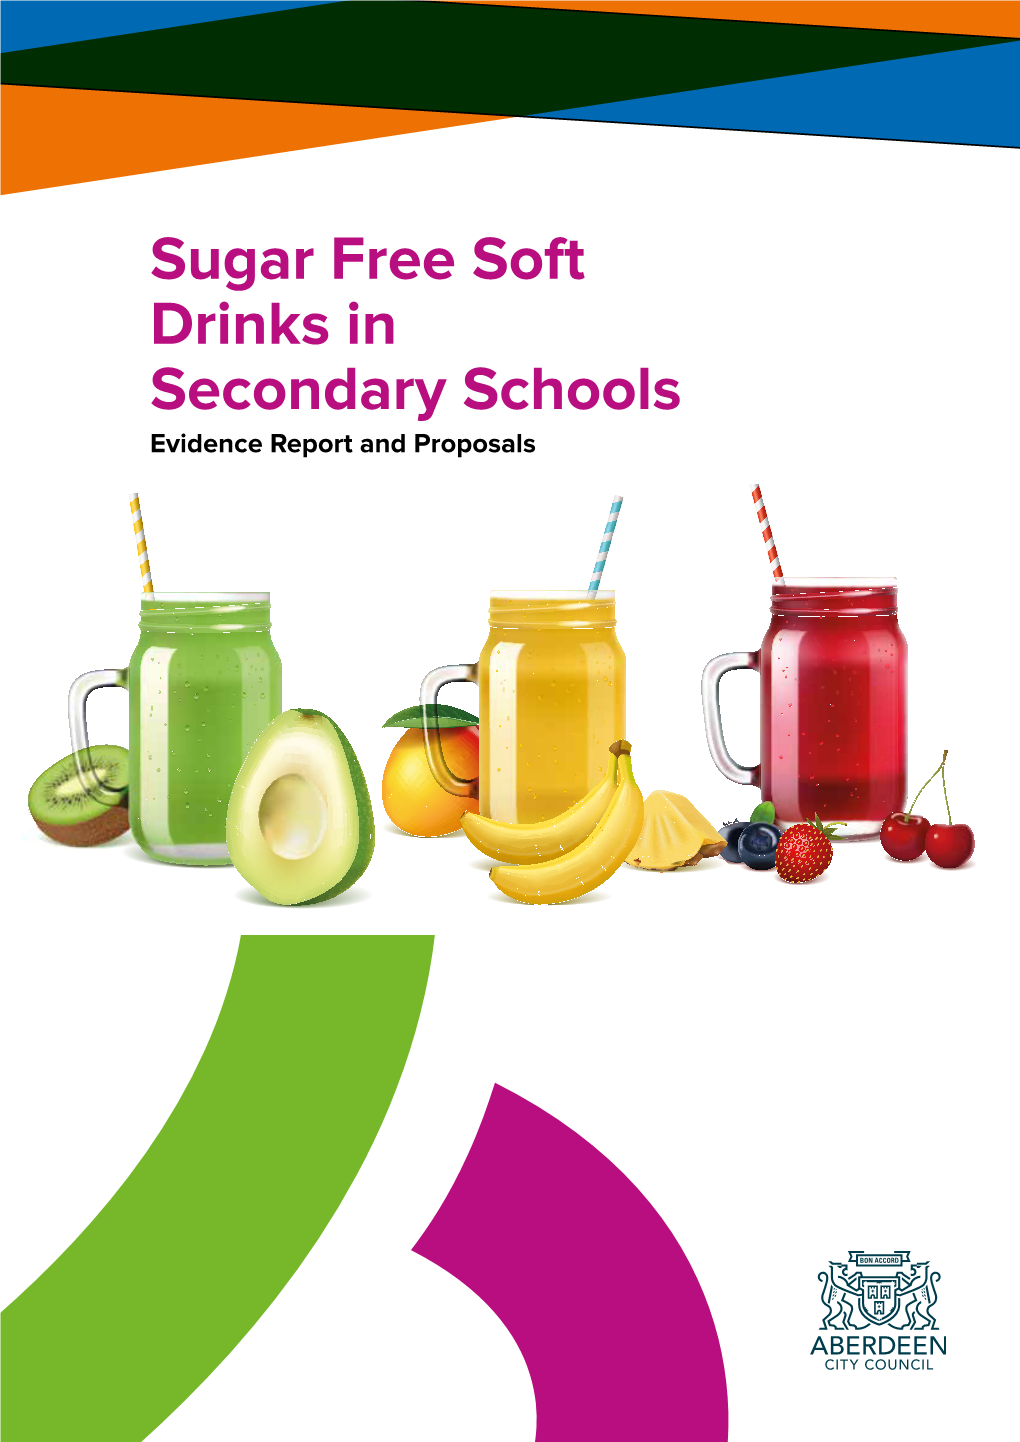 Sugar Free Soft Drinks in Secondary Schools Evidence Report and Proposals Aberdeen City Council - Sugar Free Soft Drinks in Secondary Schools